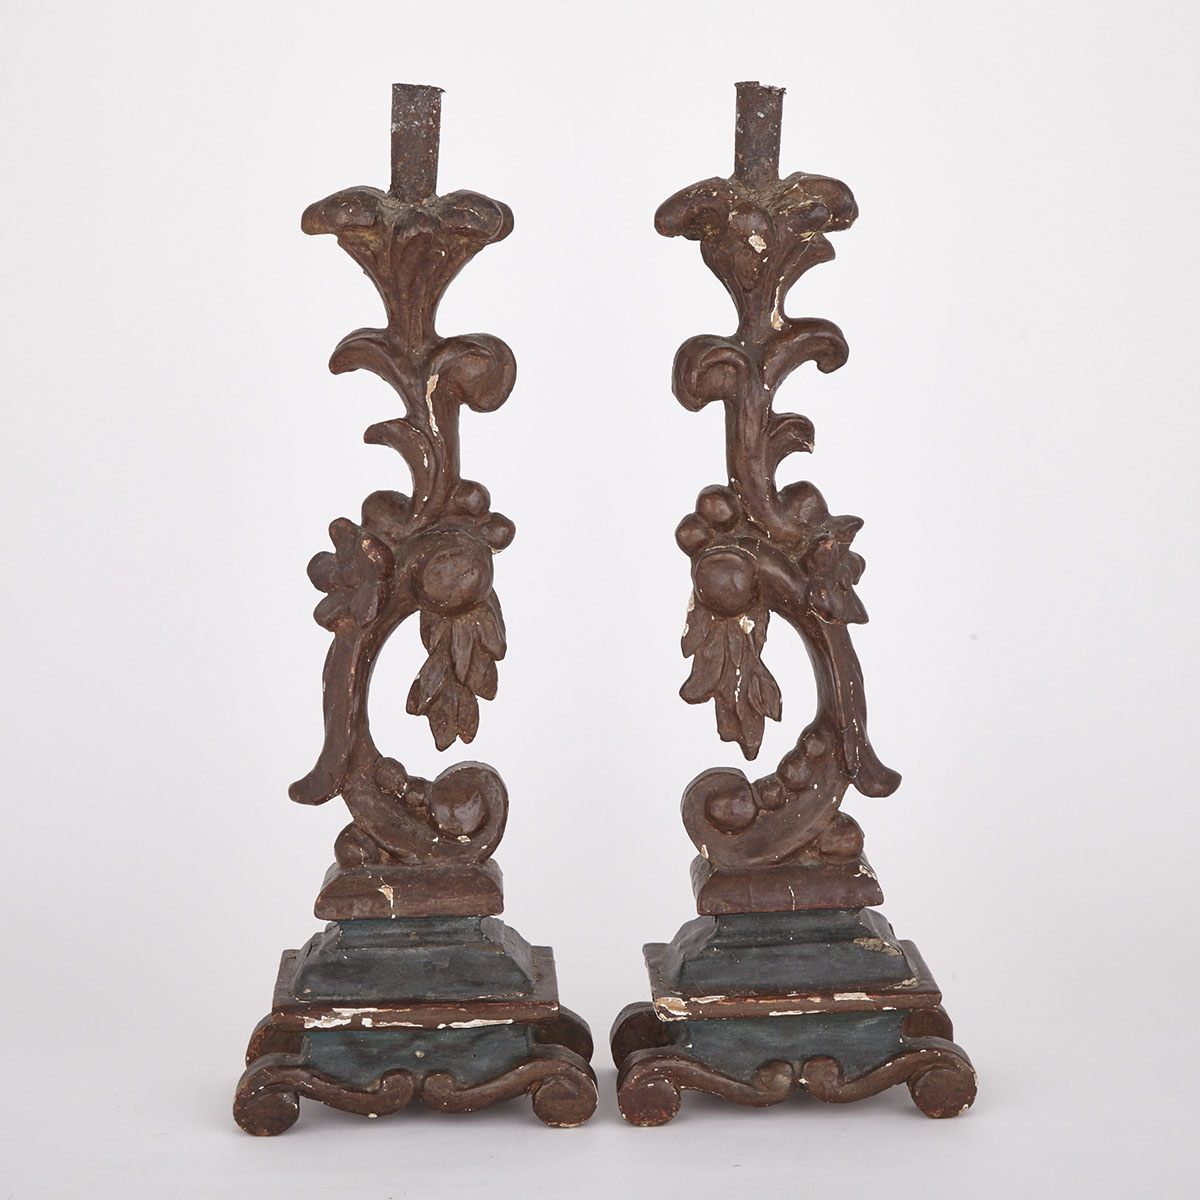 Large Pair of Carved, Gessoed and Polycrhomed Candlesticks, early 19th century